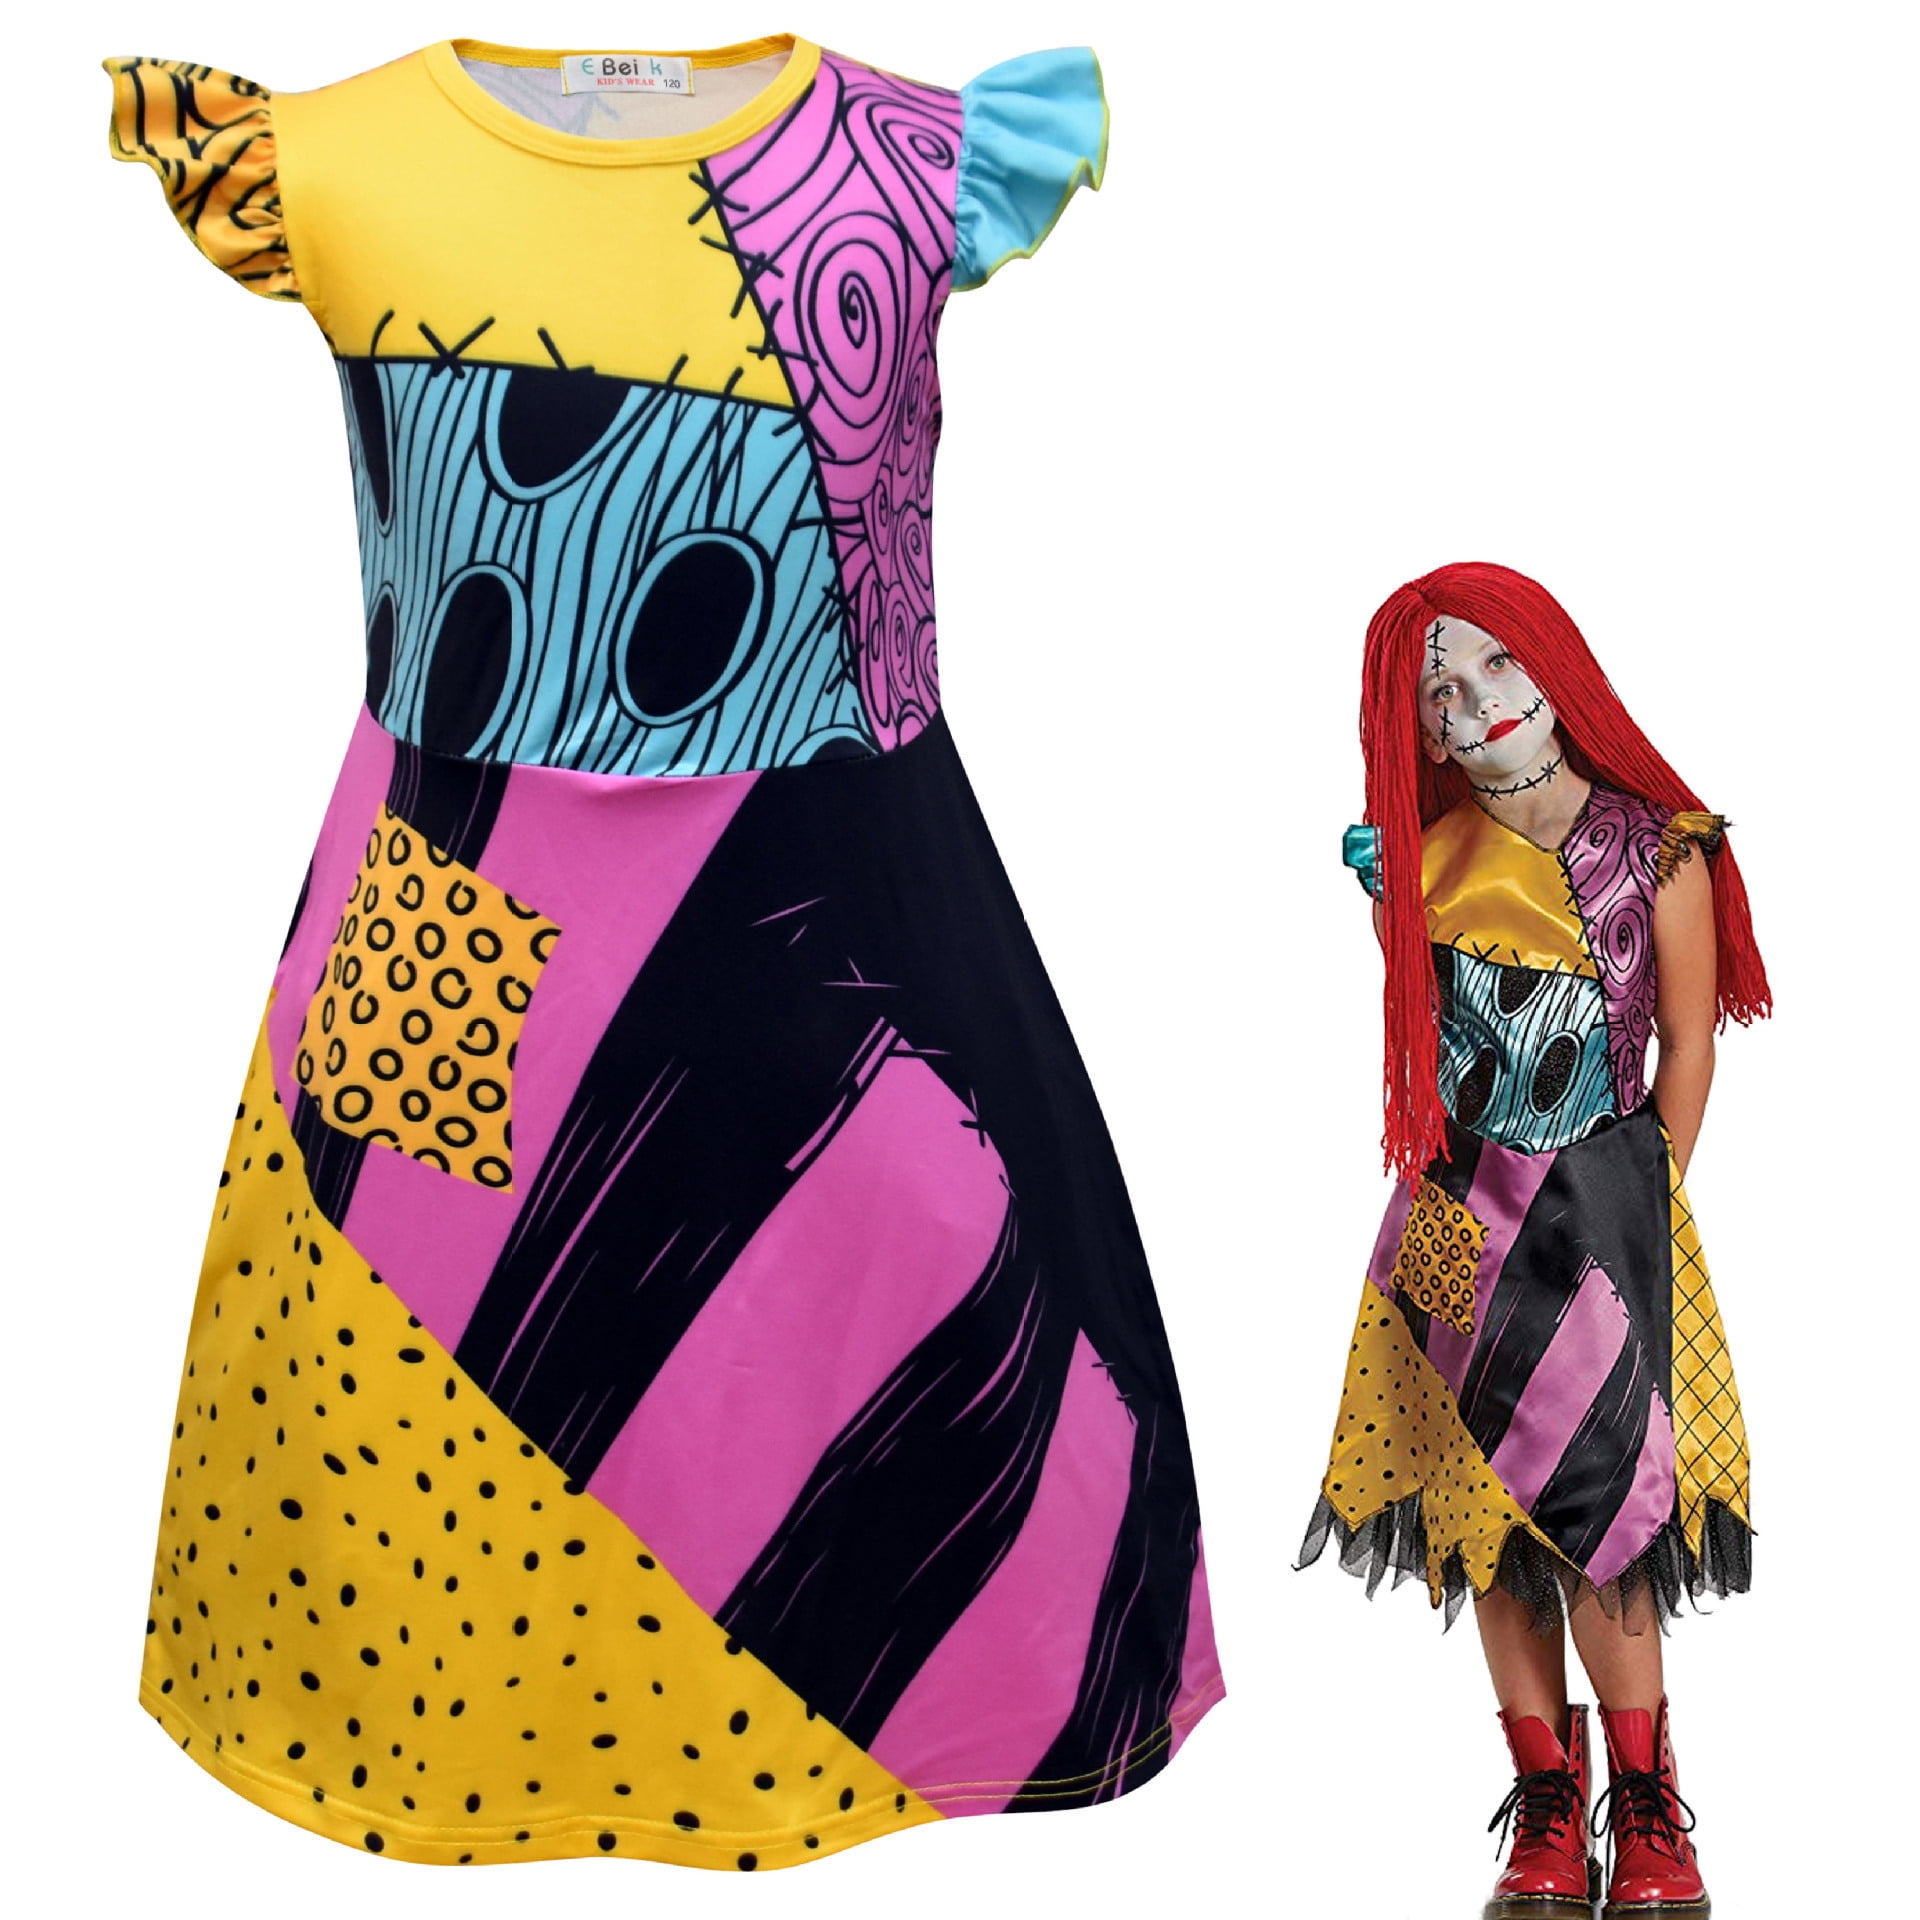 sally’s dress from nightmare before christmas